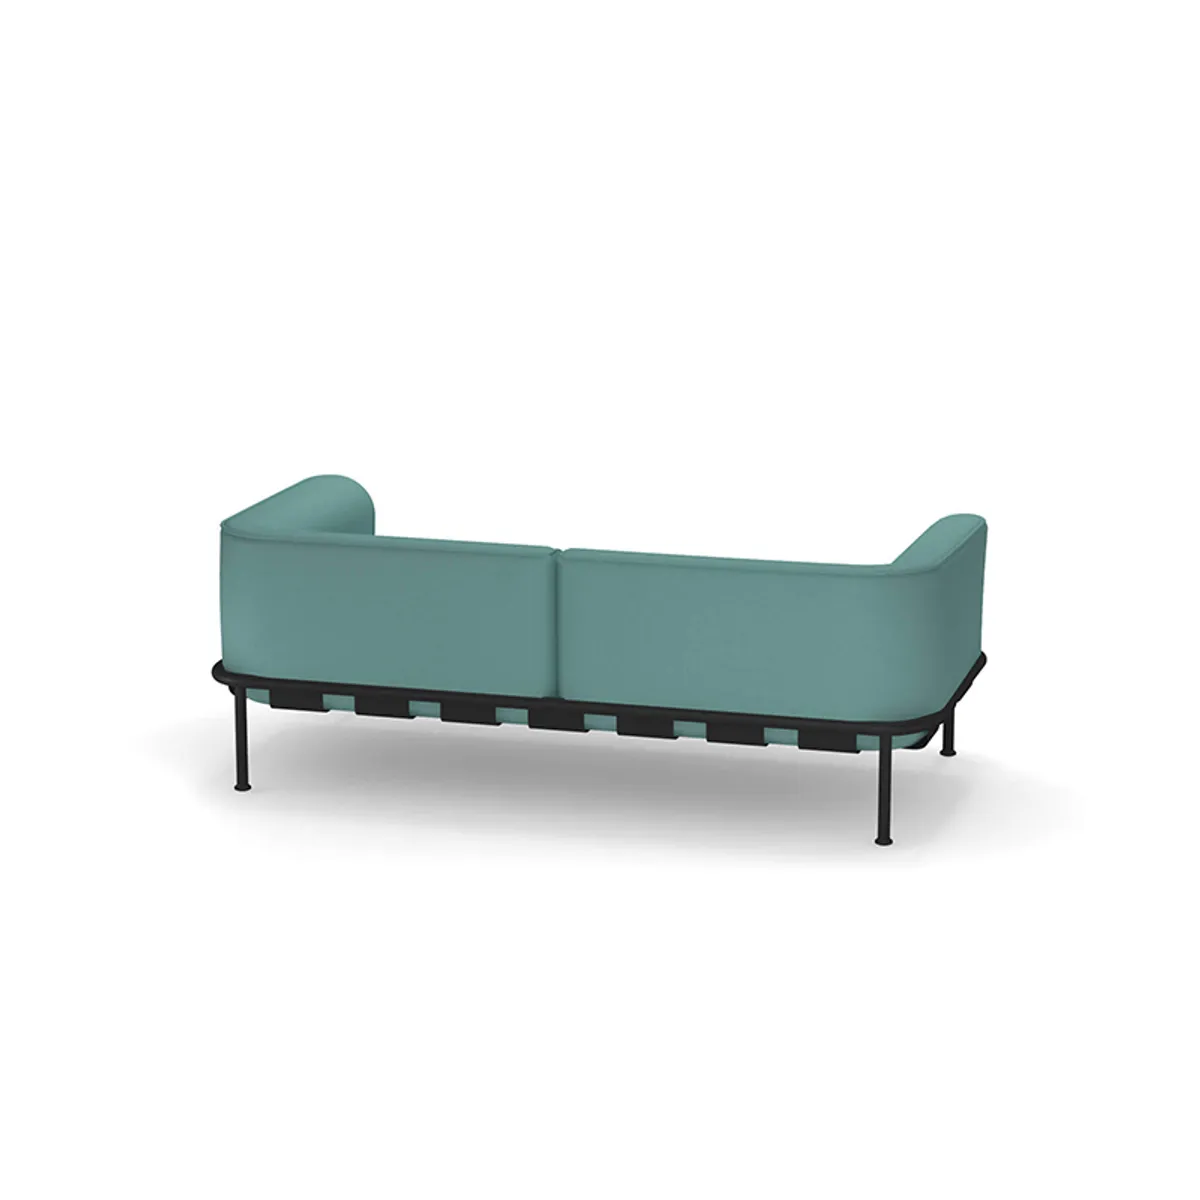 Dock 2 Seater Sofa 24 3 Outdoor Use Inside Out Contracst